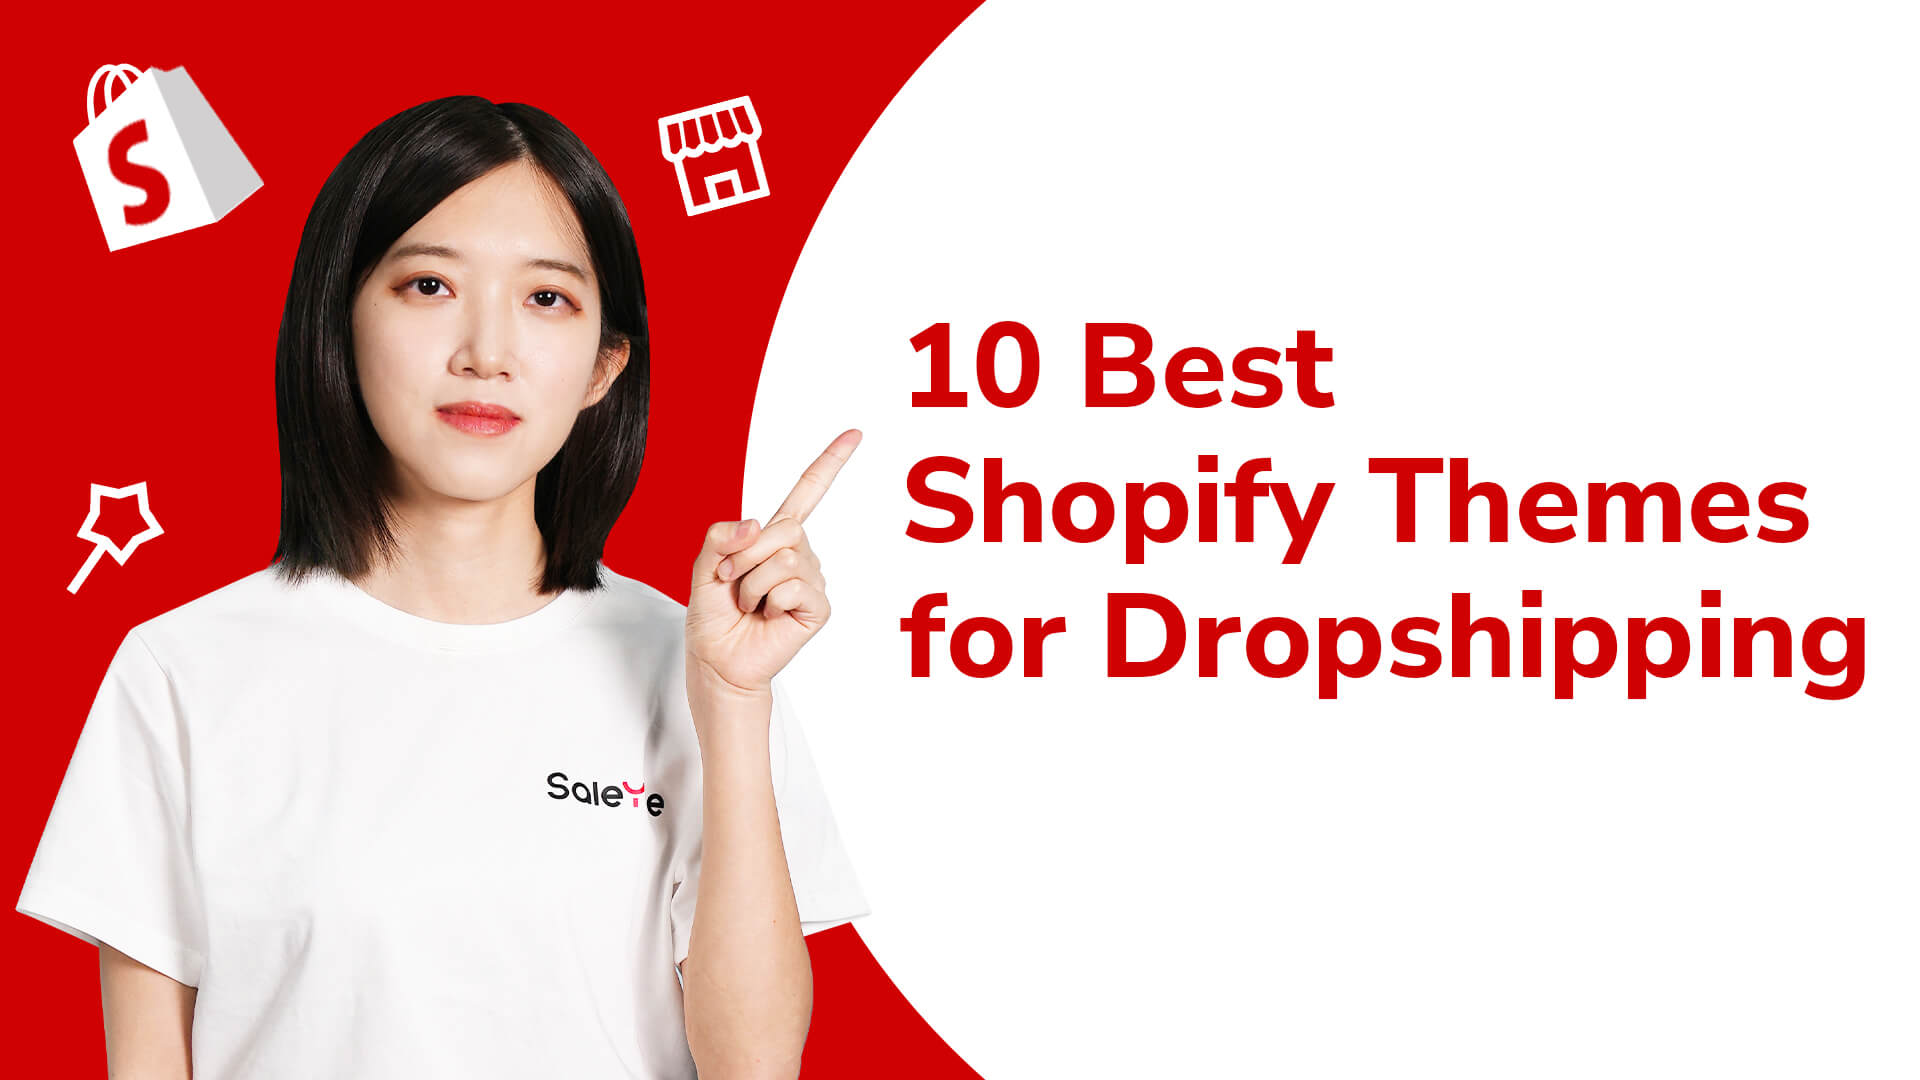 10 Best Shopify Themes for Dropshipping